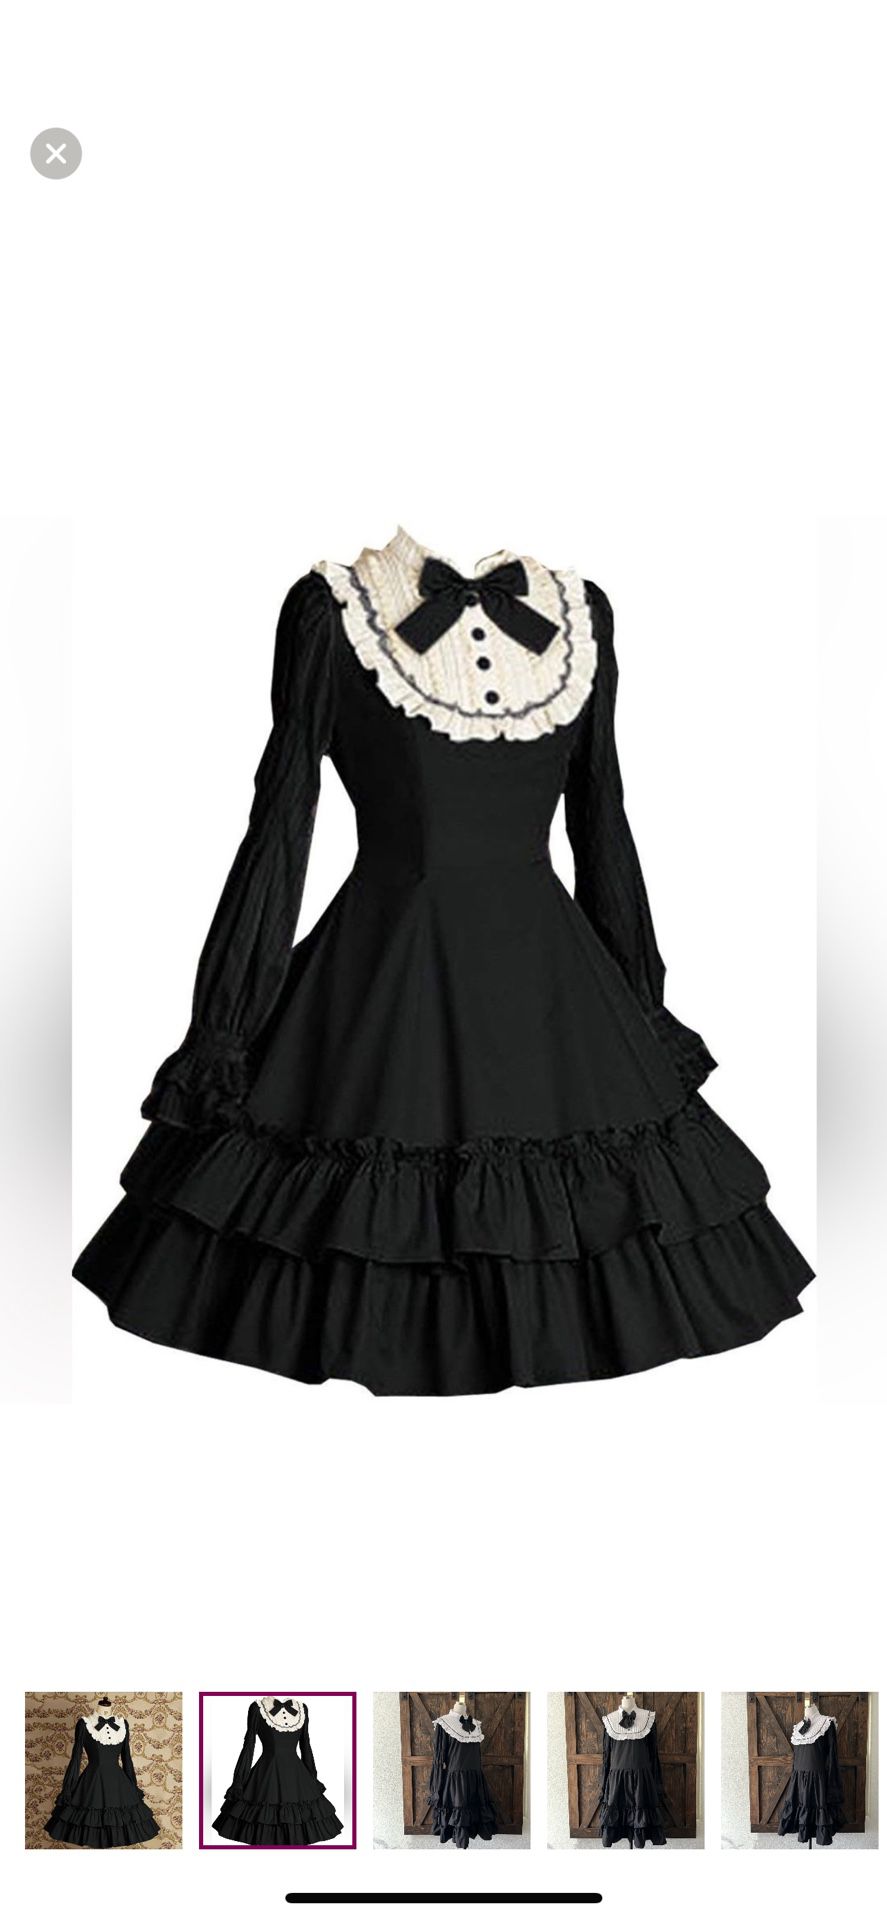 New New Black and White Sweet Vintage Cotton Dress Lolita Classic Mary Magdalene Size- 3XL 